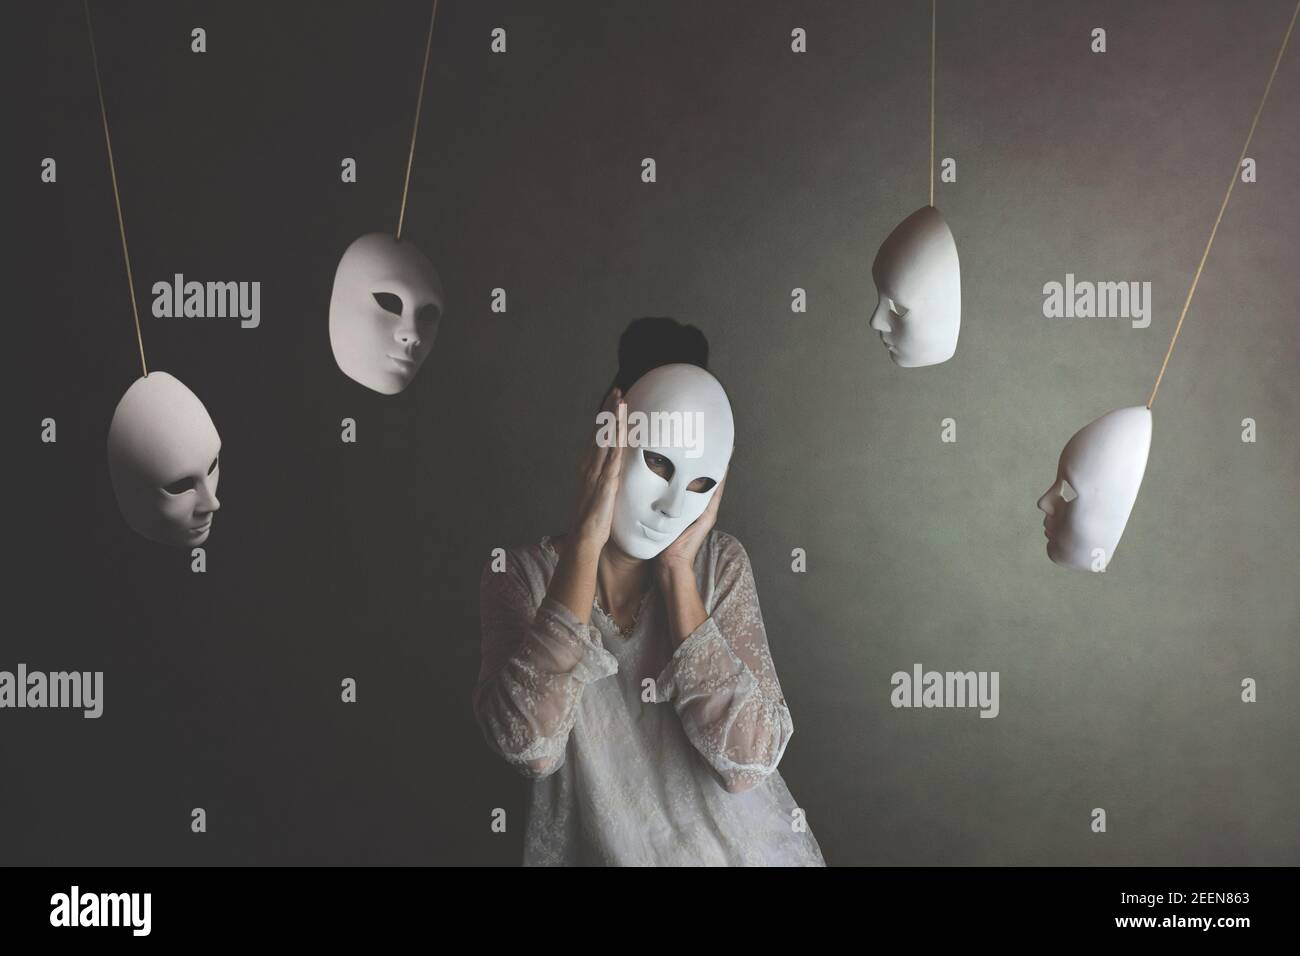 person with mask does not want to hear the judgment of other masks, concept of judgment and introspection Stock Photo